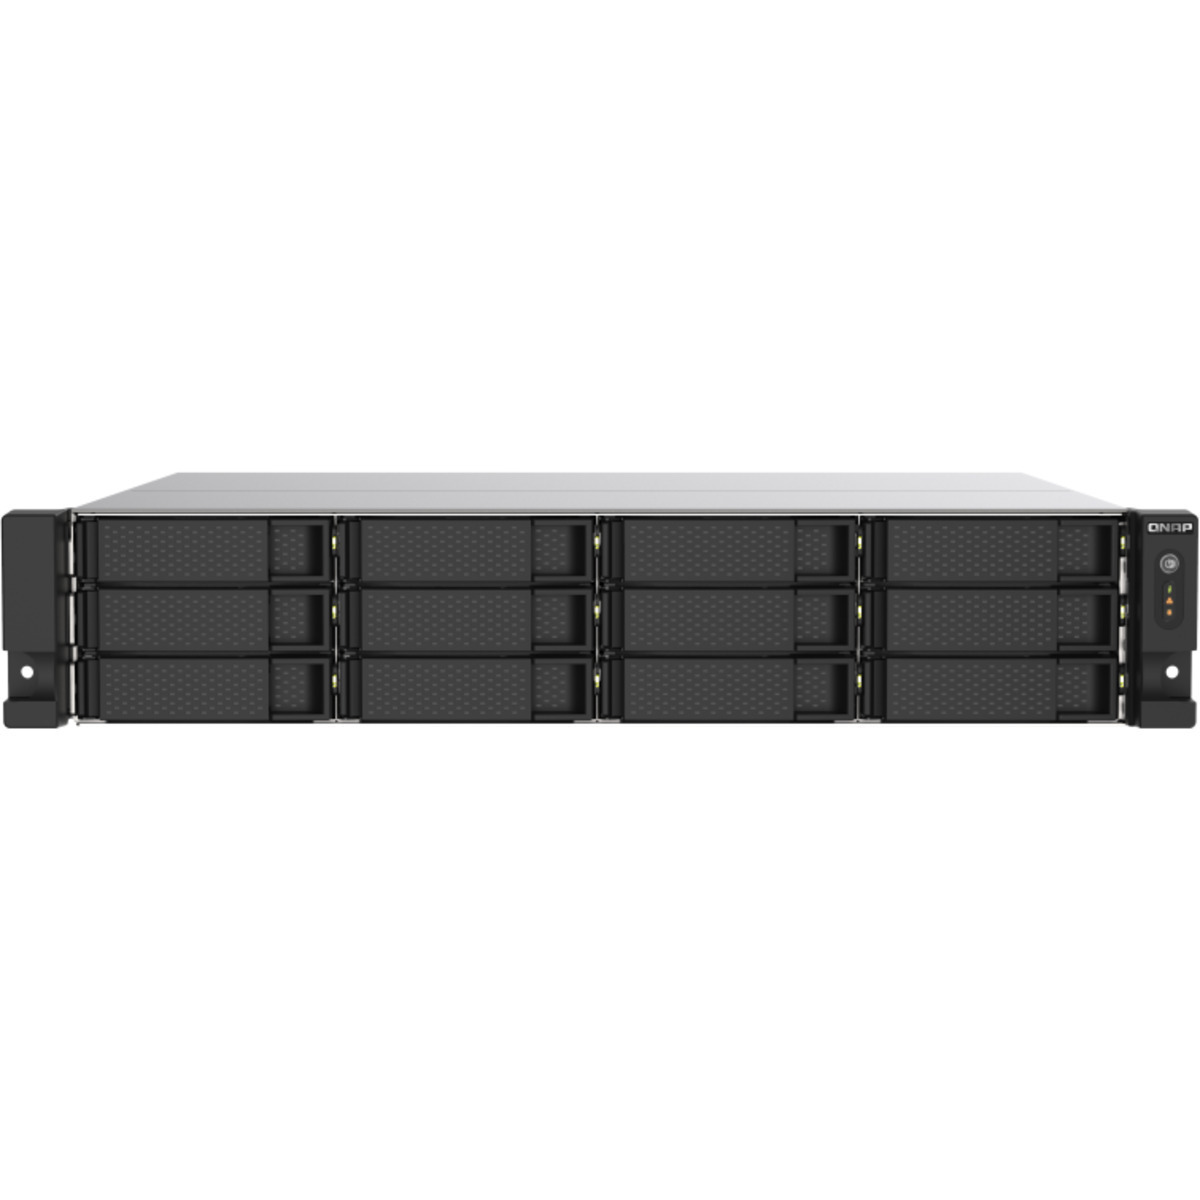 QNAP TS-1273AU-RP 96tb 12-Bay RackMount Multimedia / Power User / Business NAS - Network Attached Storage Device 12x8tb Western Digital Red Pro WD8003FFBX 3.5 7200rpm SATA 6Gb/s HDD NAS Class Drives Installed - Burn-In Tested - FREE RAM UPGRADE TS-1273AU-RP